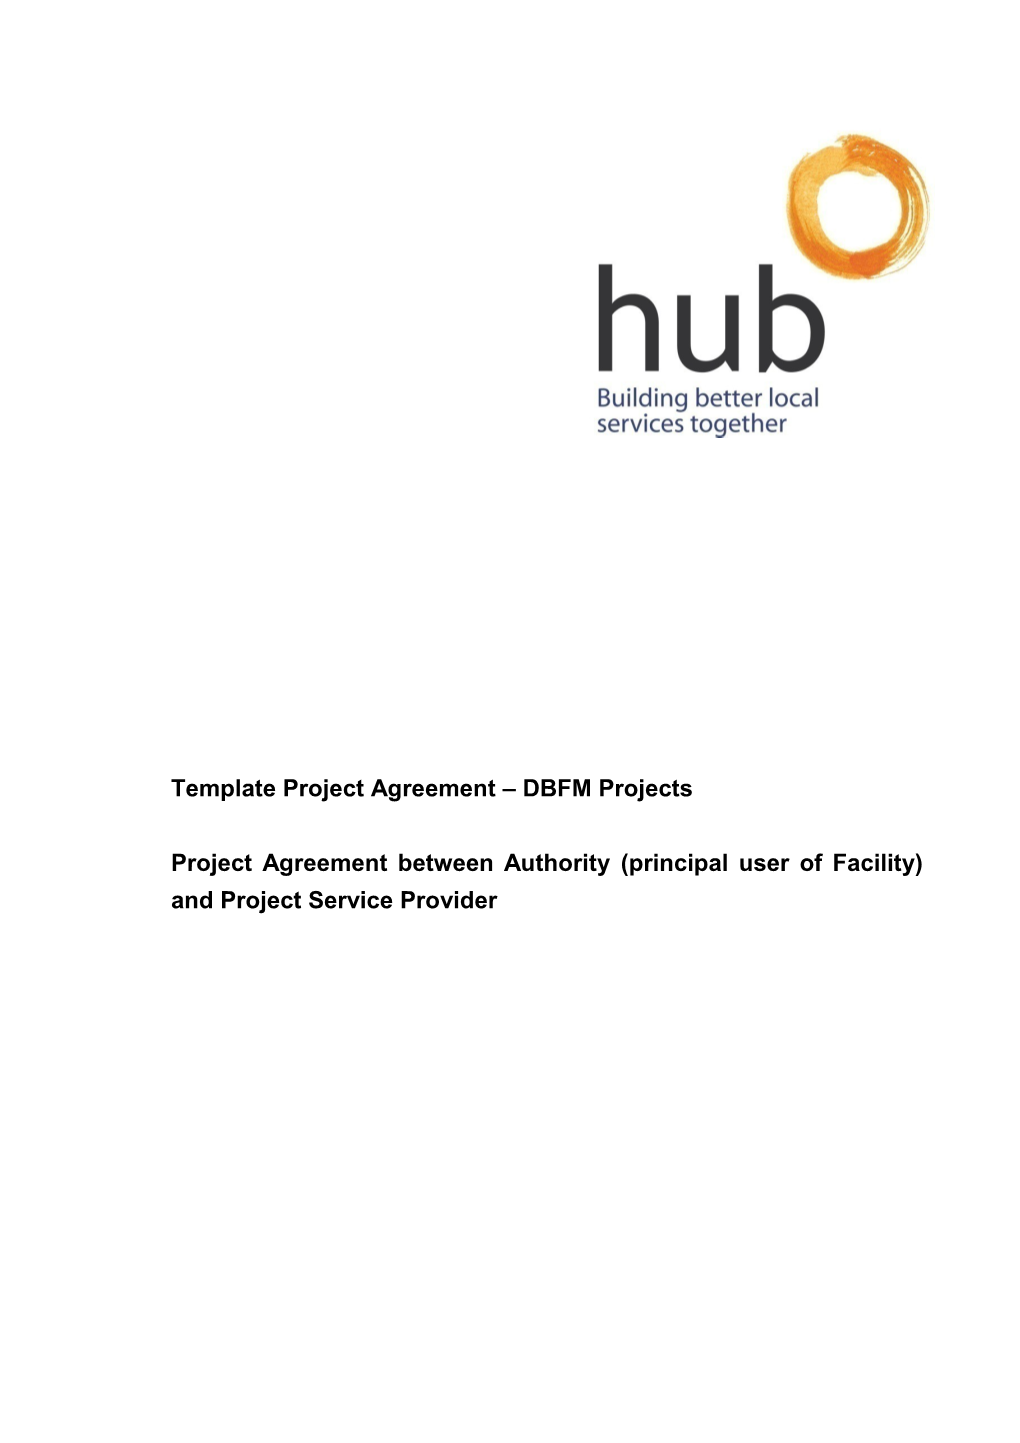 Project Agreement Between Authority (Principal User of Facility) and Project Service Provider